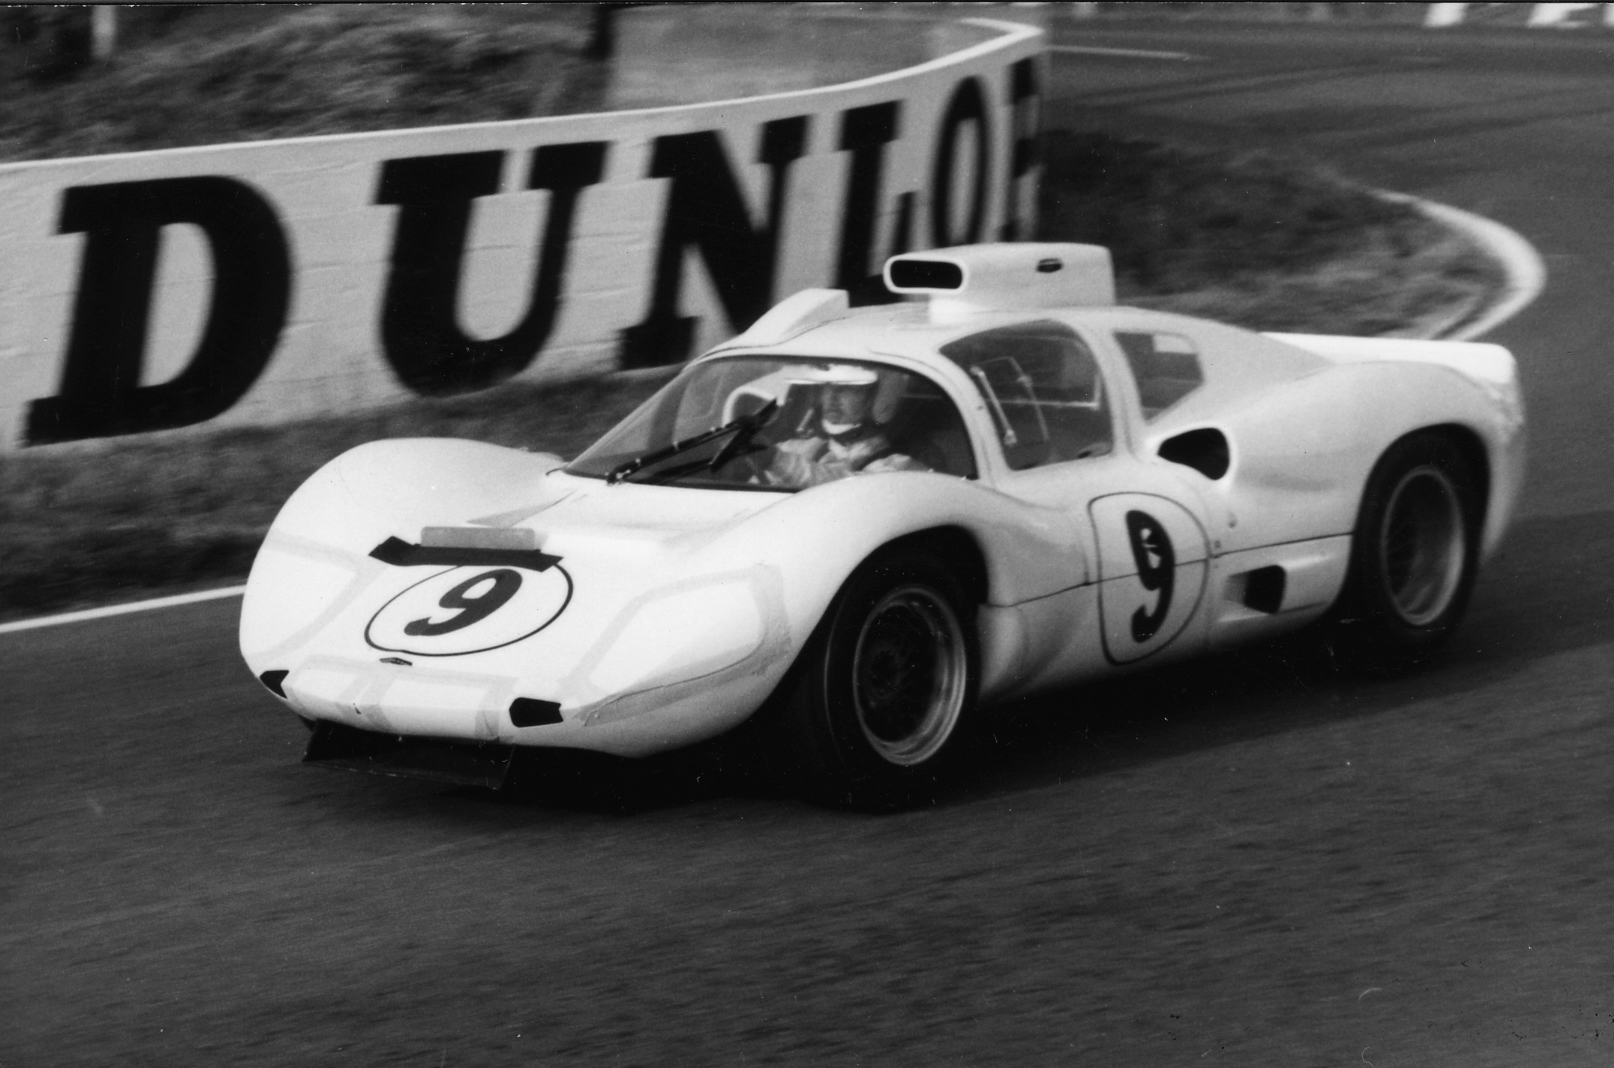 The Chaparral 2D was noticeable from miles away, as was the team's Texan accent...